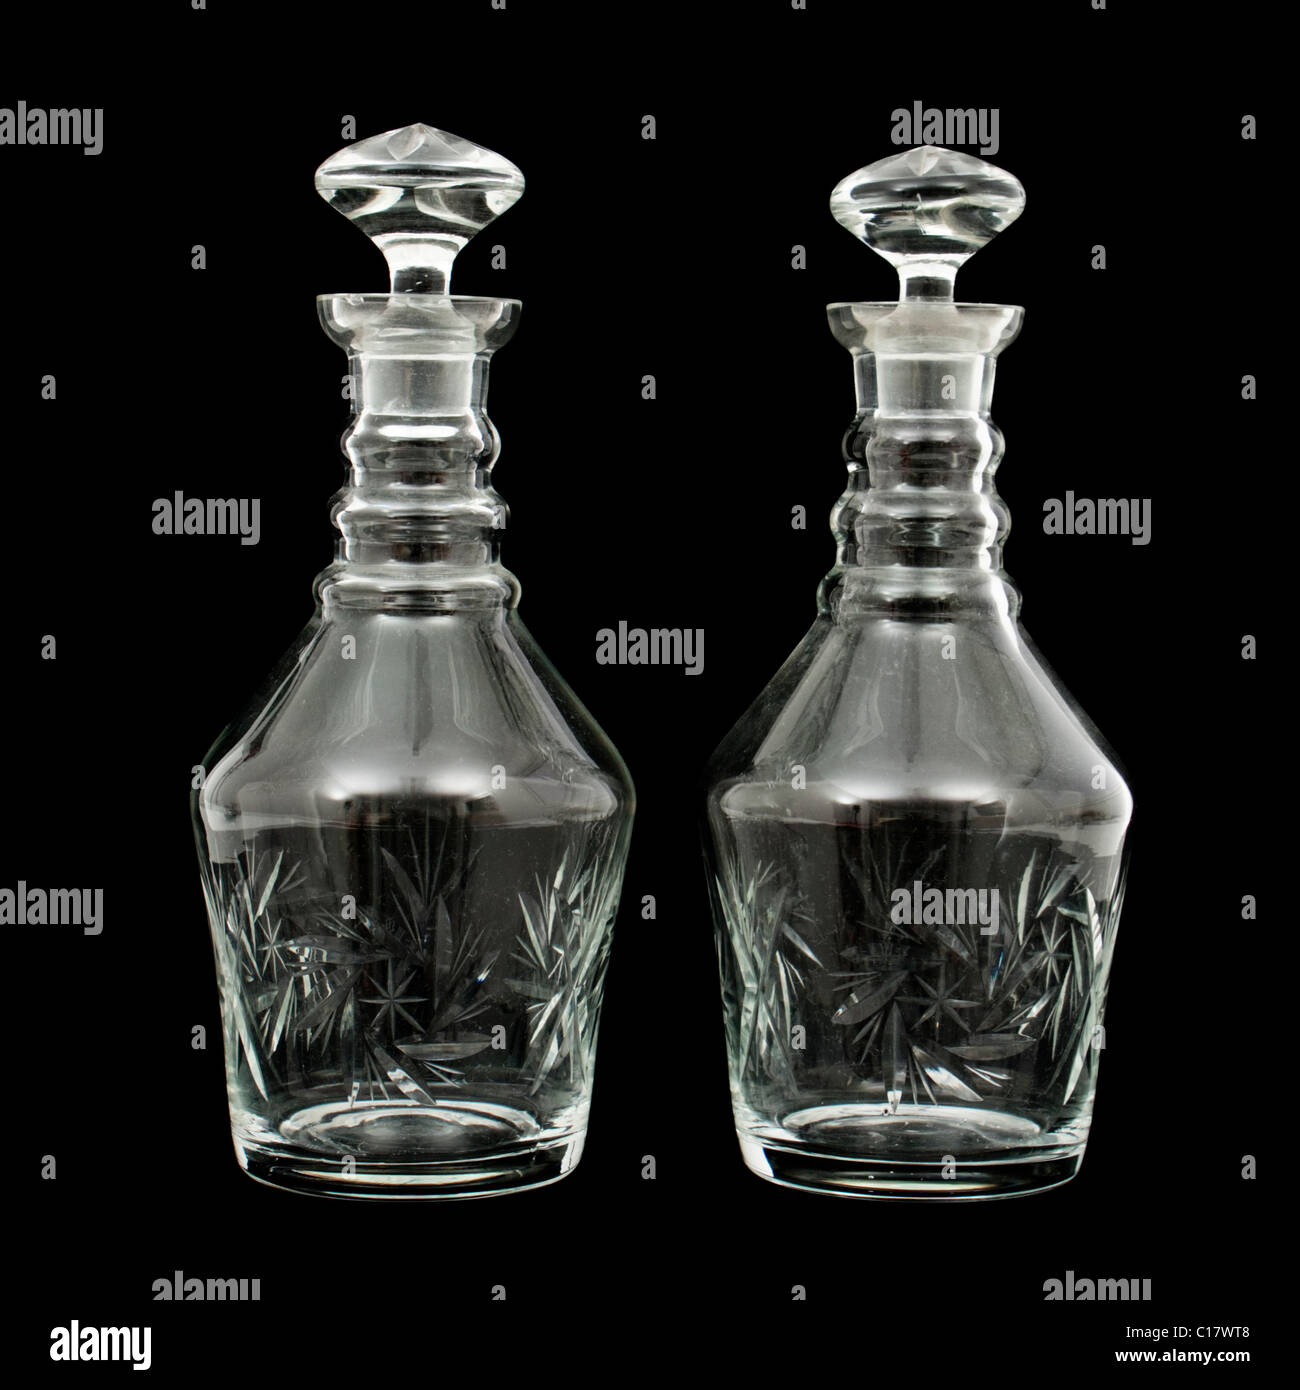 Pair of vintage lead crystal glass decanters Stock Photo